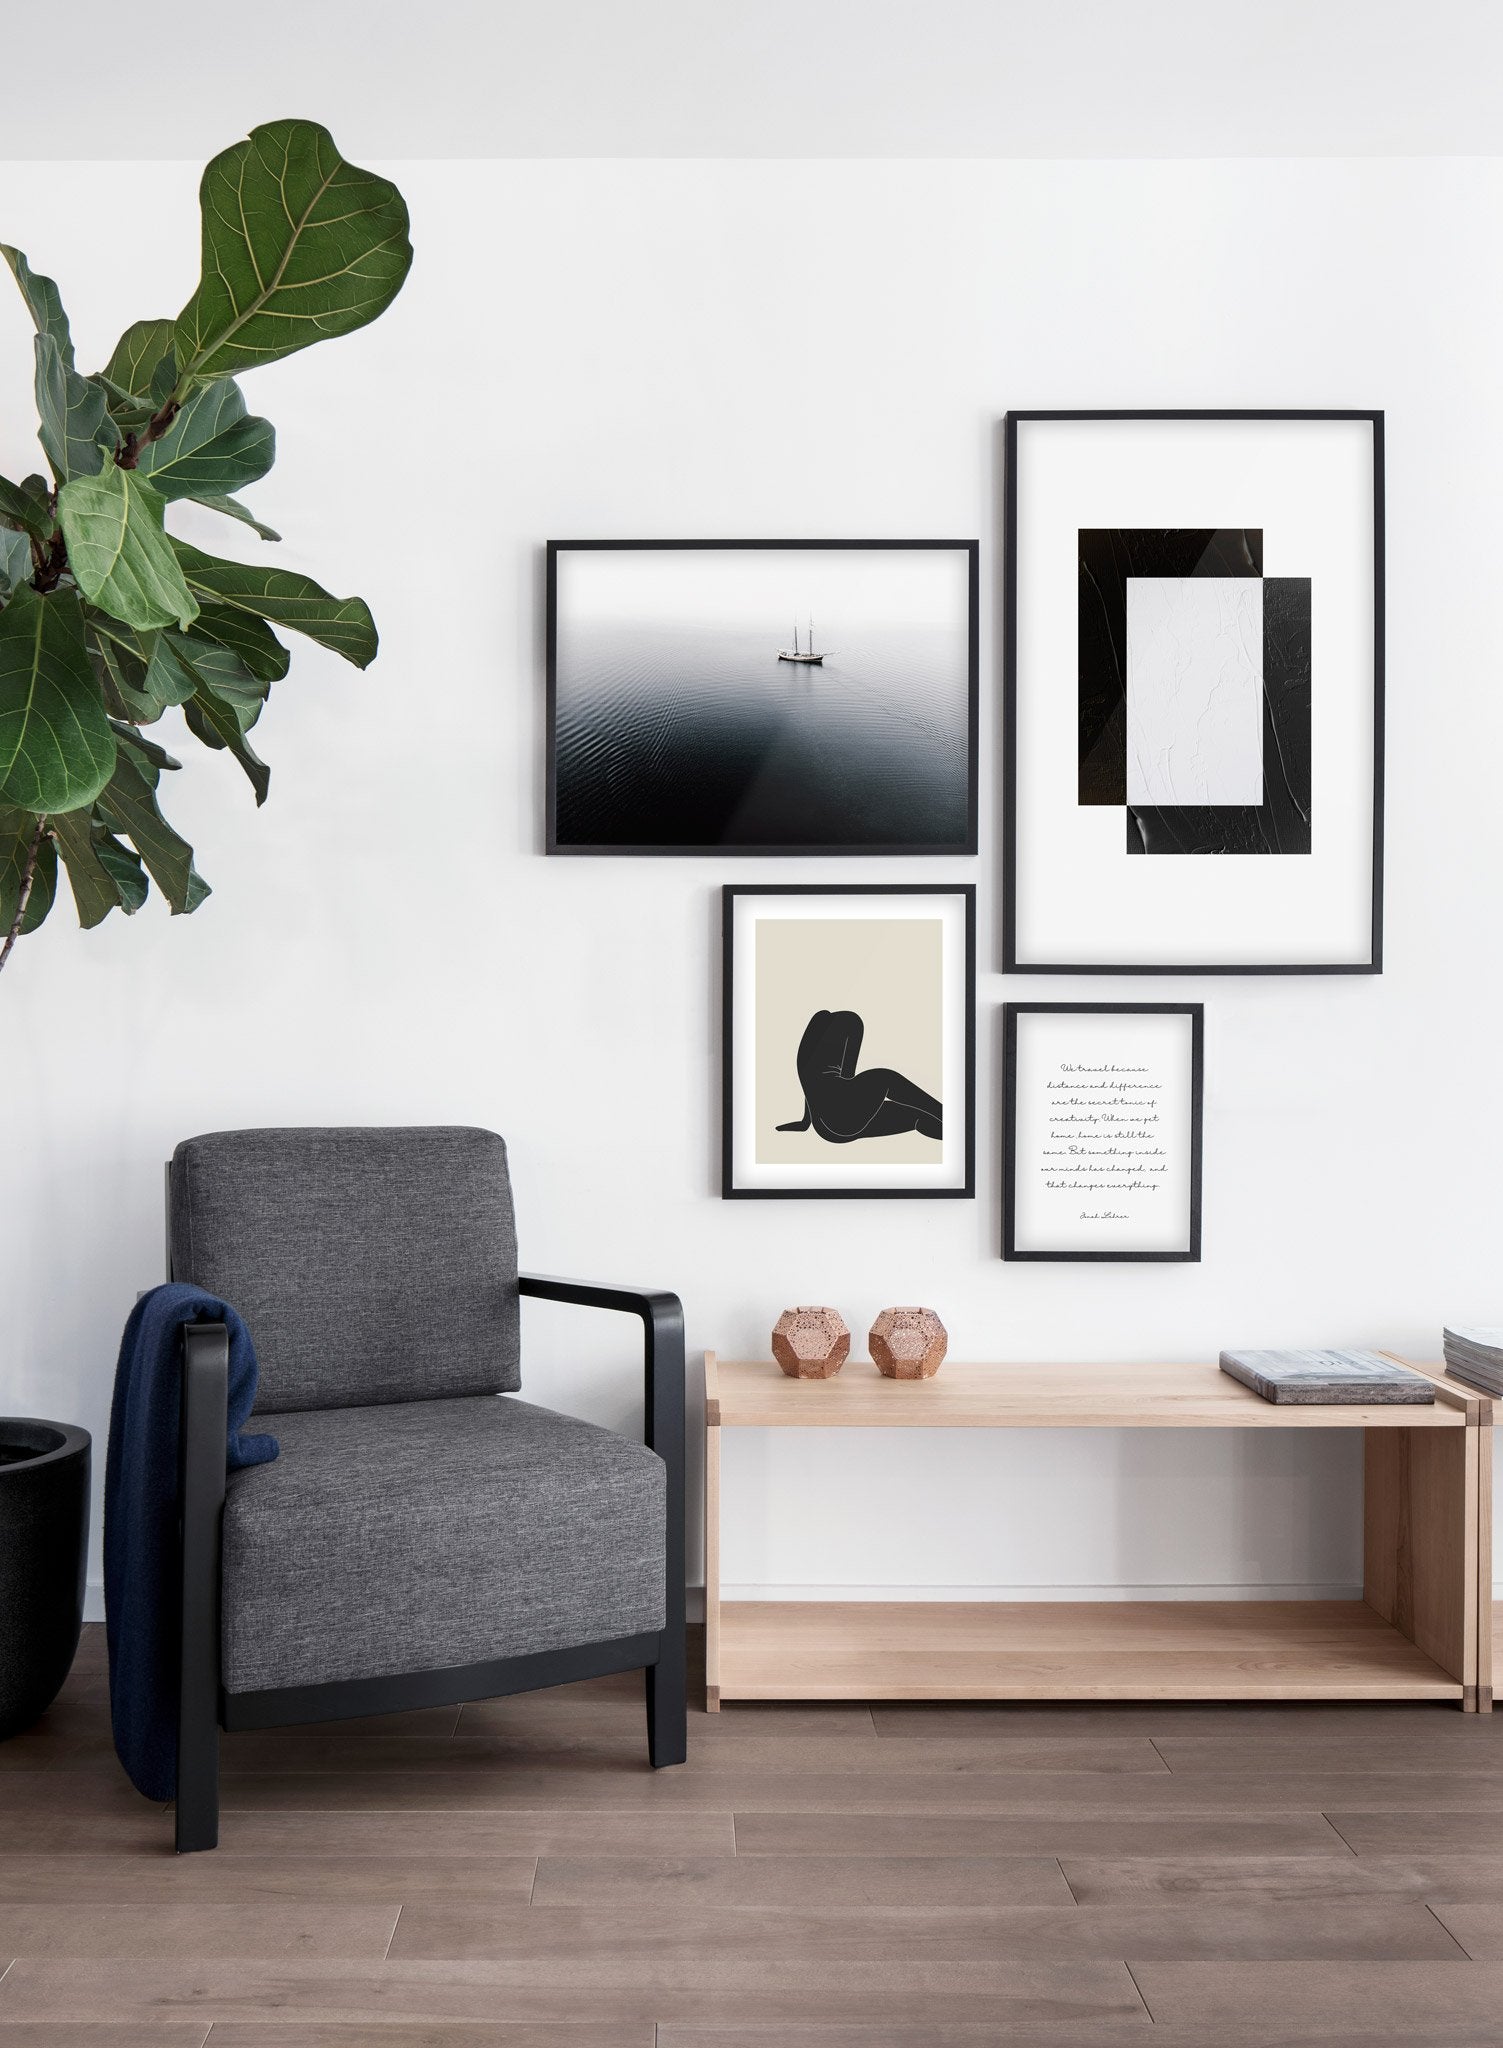 Lone ship modern minimalist photography poster by Opposite Wall - Living room with gallery wall quad